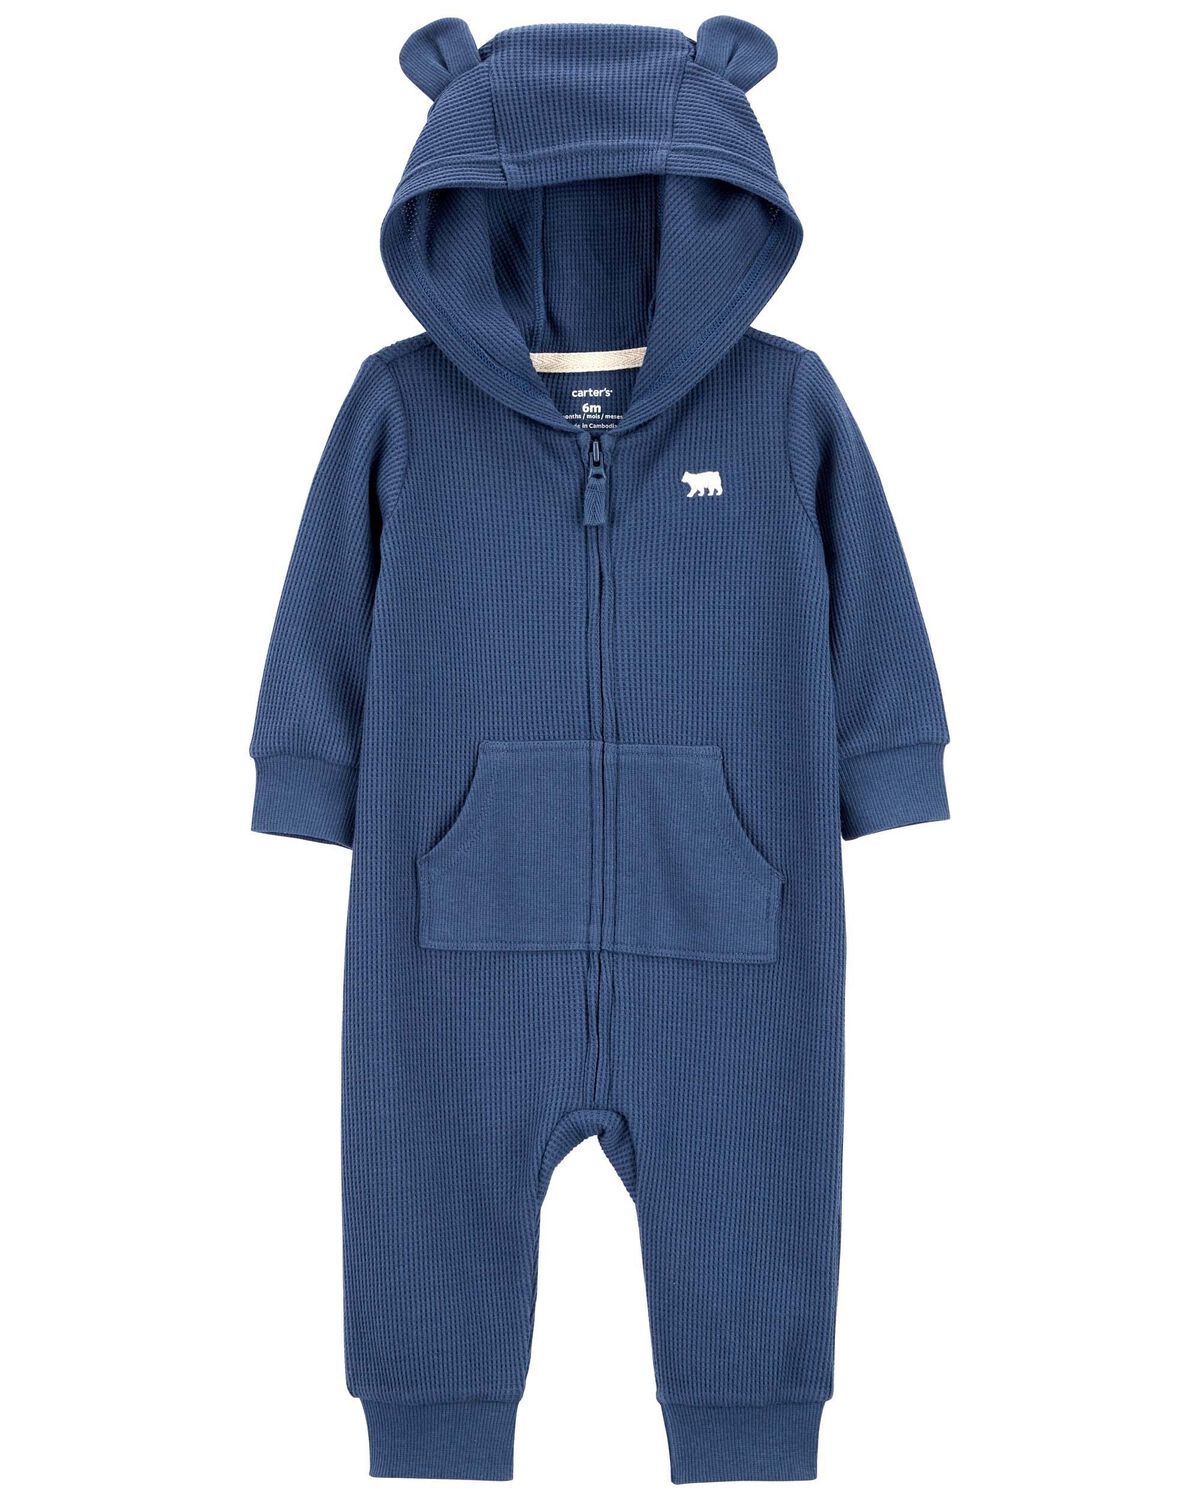 Navy Baby Zip-Up Hooded Thermal Jumpsuit | carters.com | Carter's